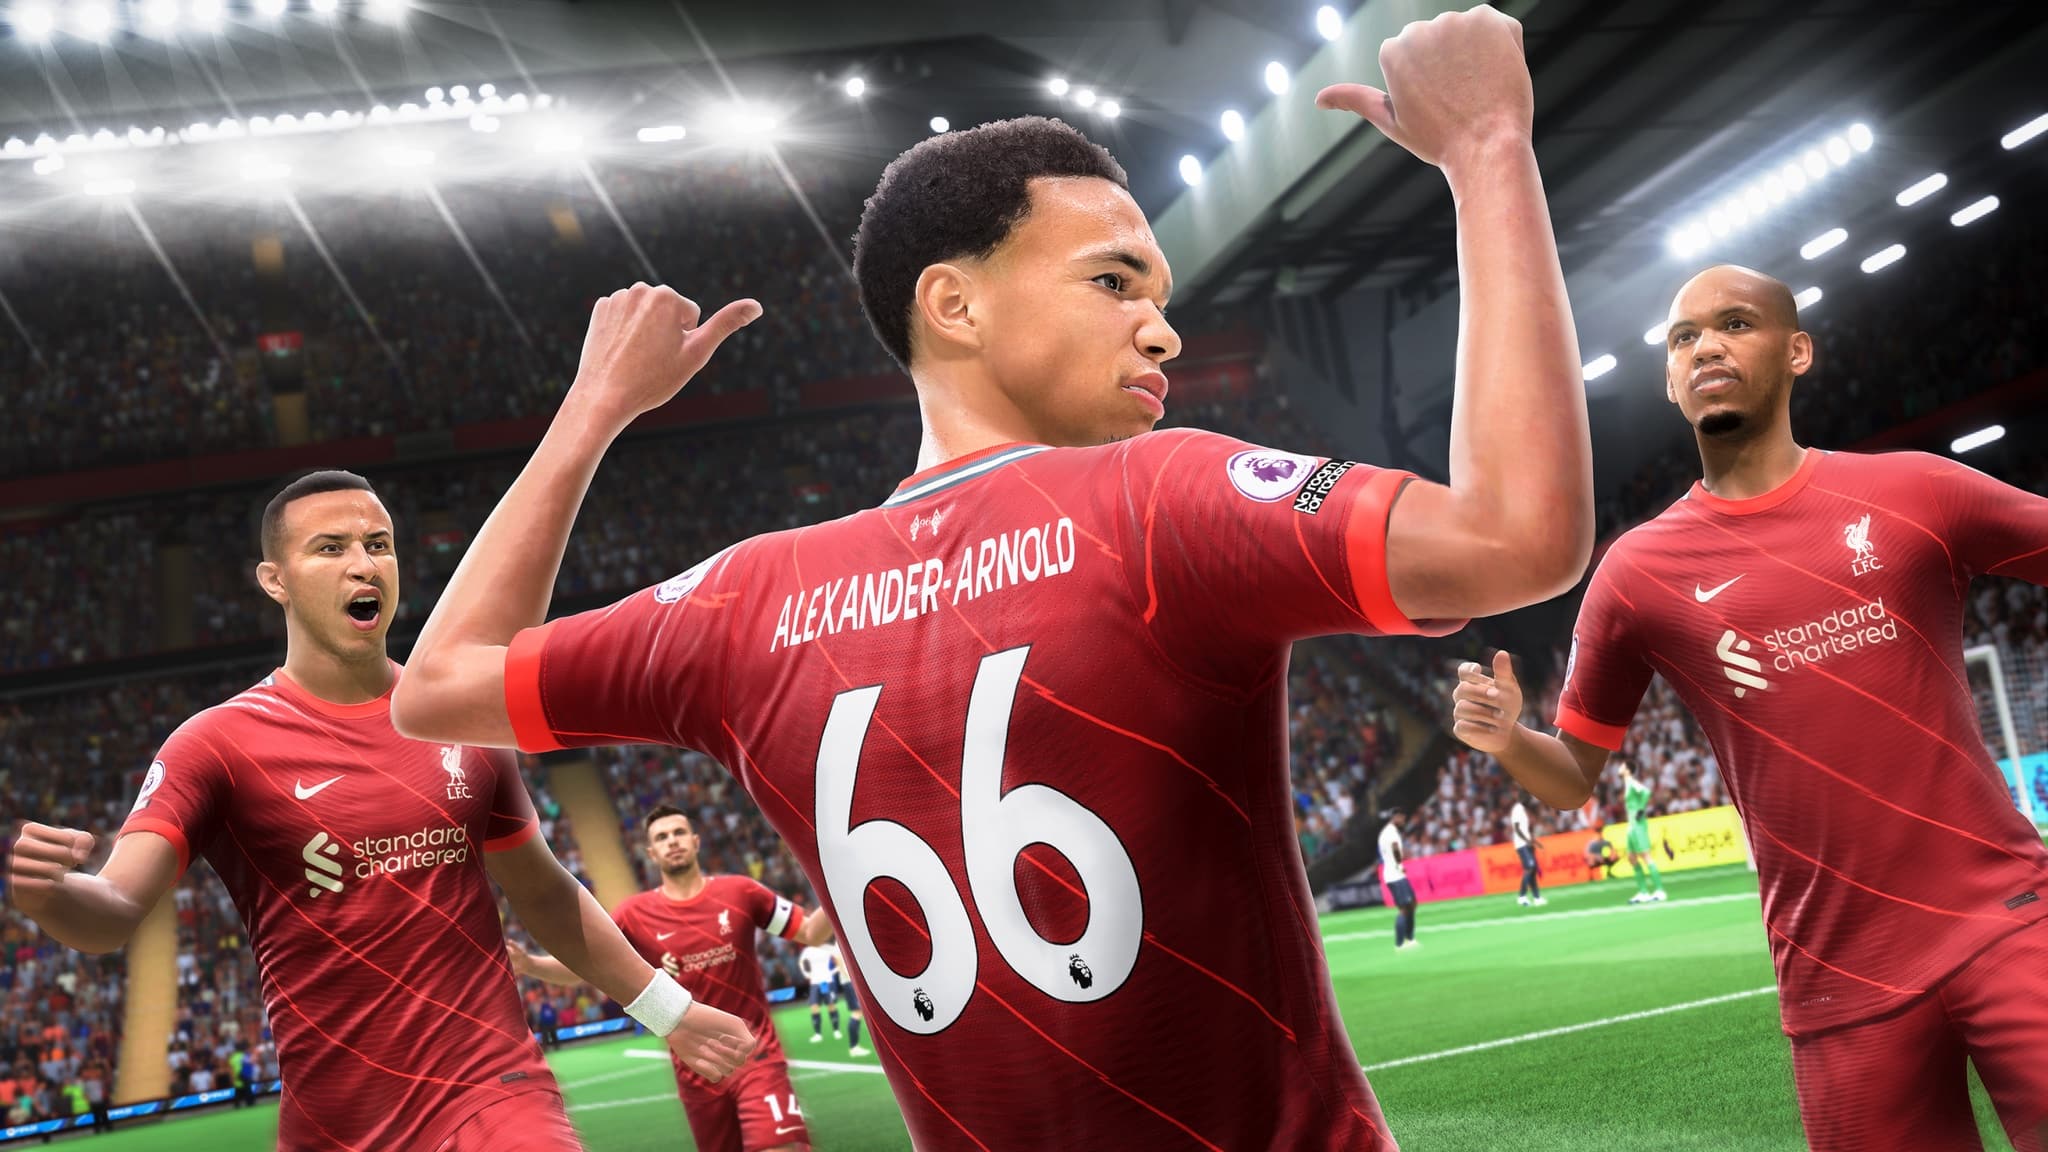 EA Sports Delists FIFA 23 Without Warning Before FC 24's Release